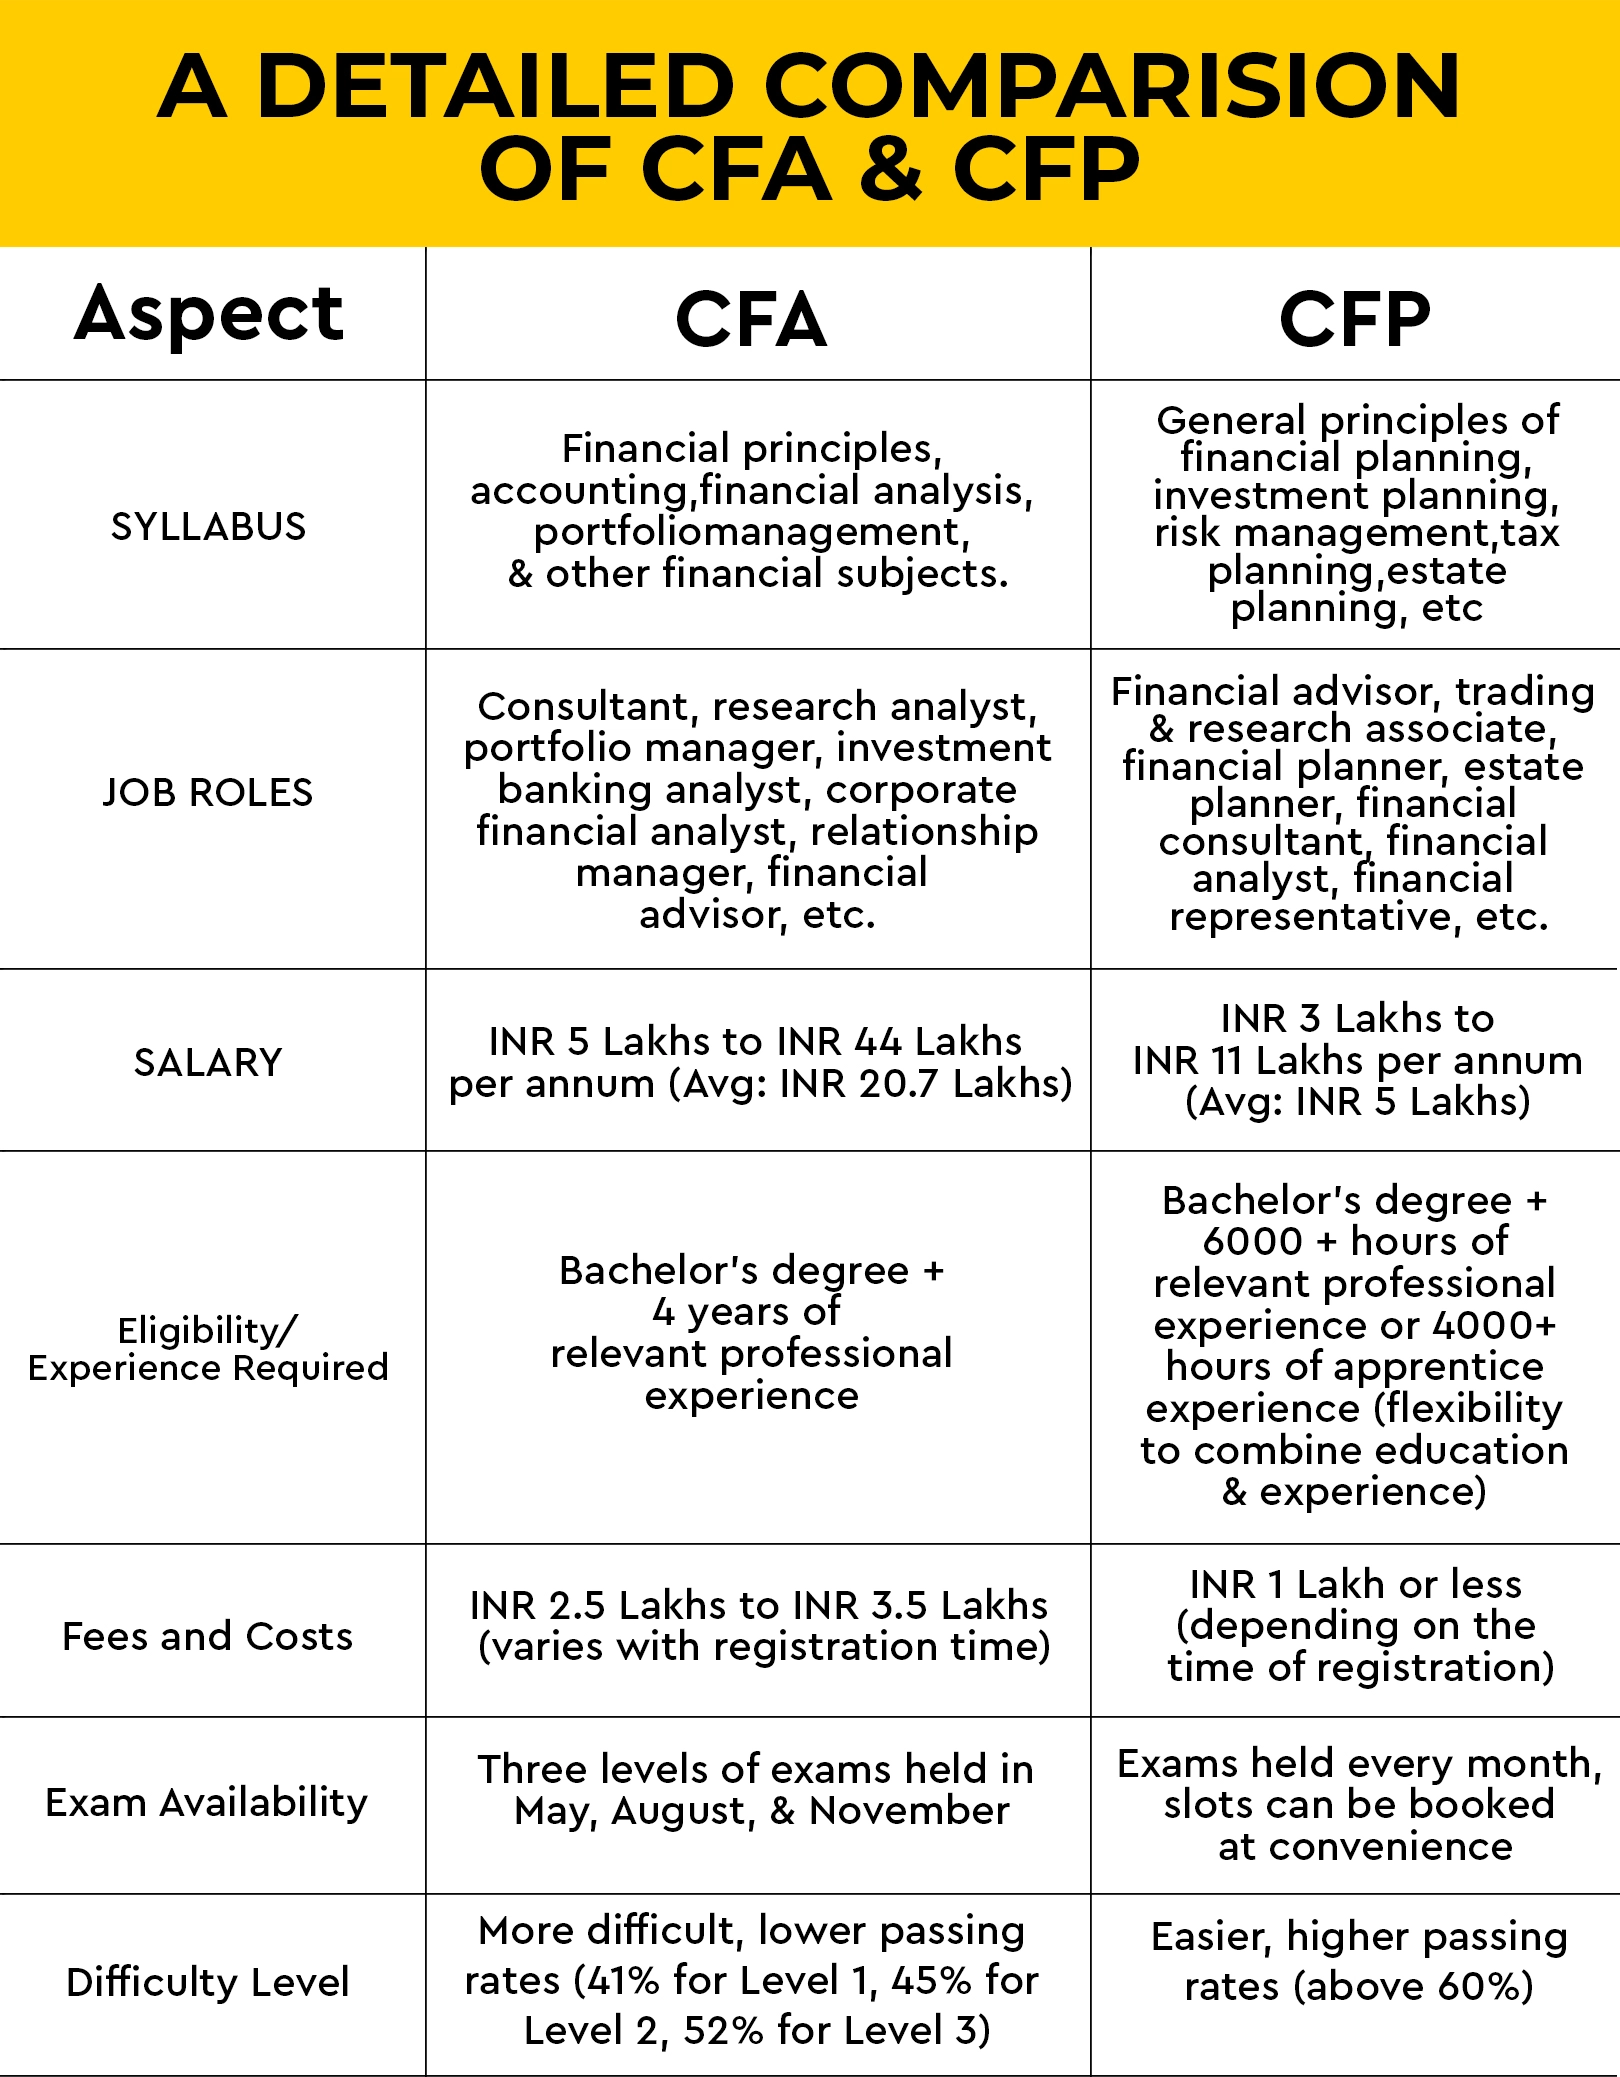 Key differences between CFA & CFP